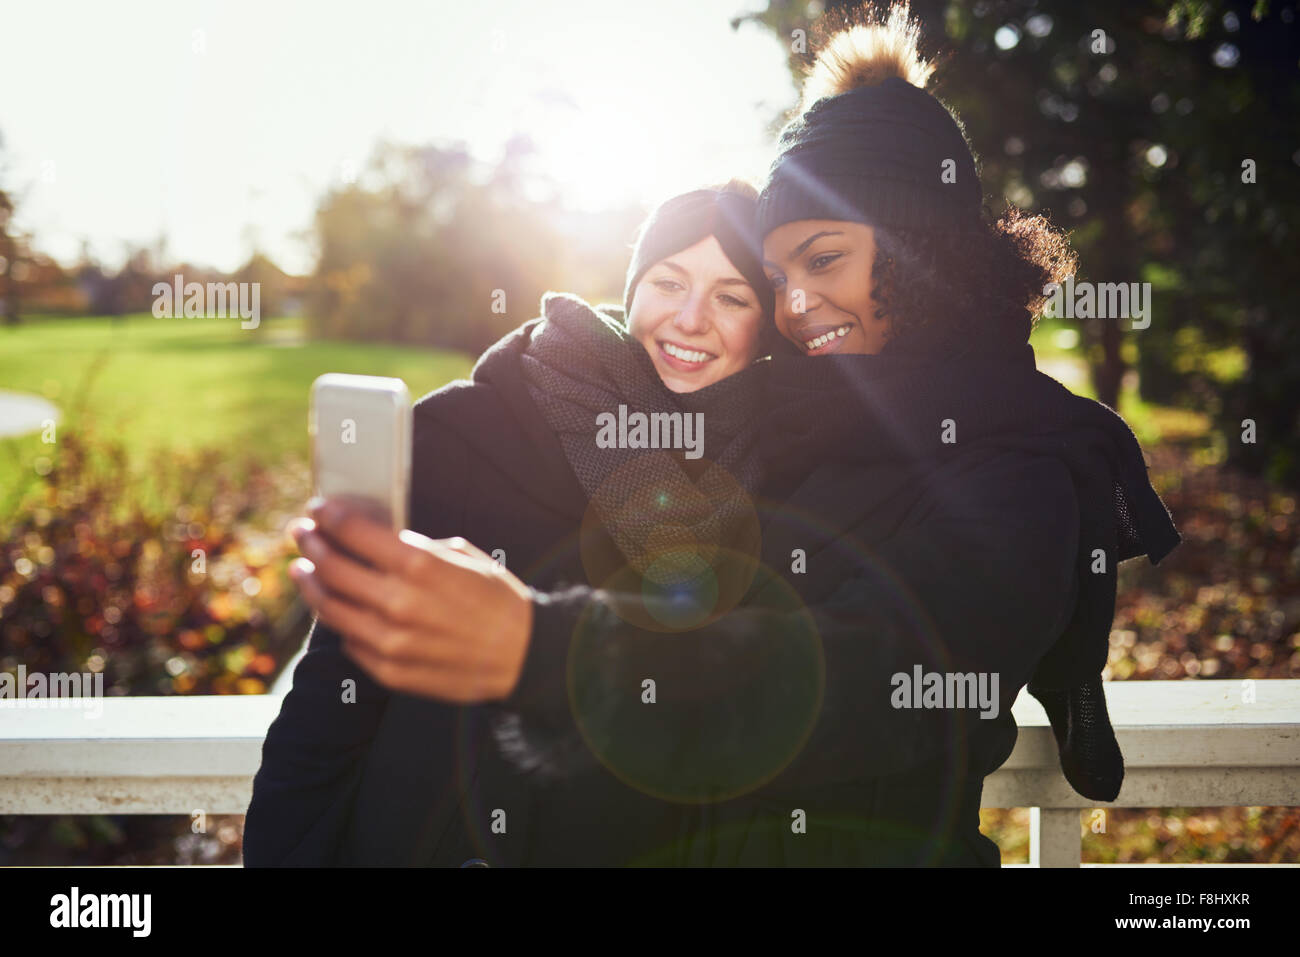 Two smiling young women taking selfie against of autumnal park Stock Photo